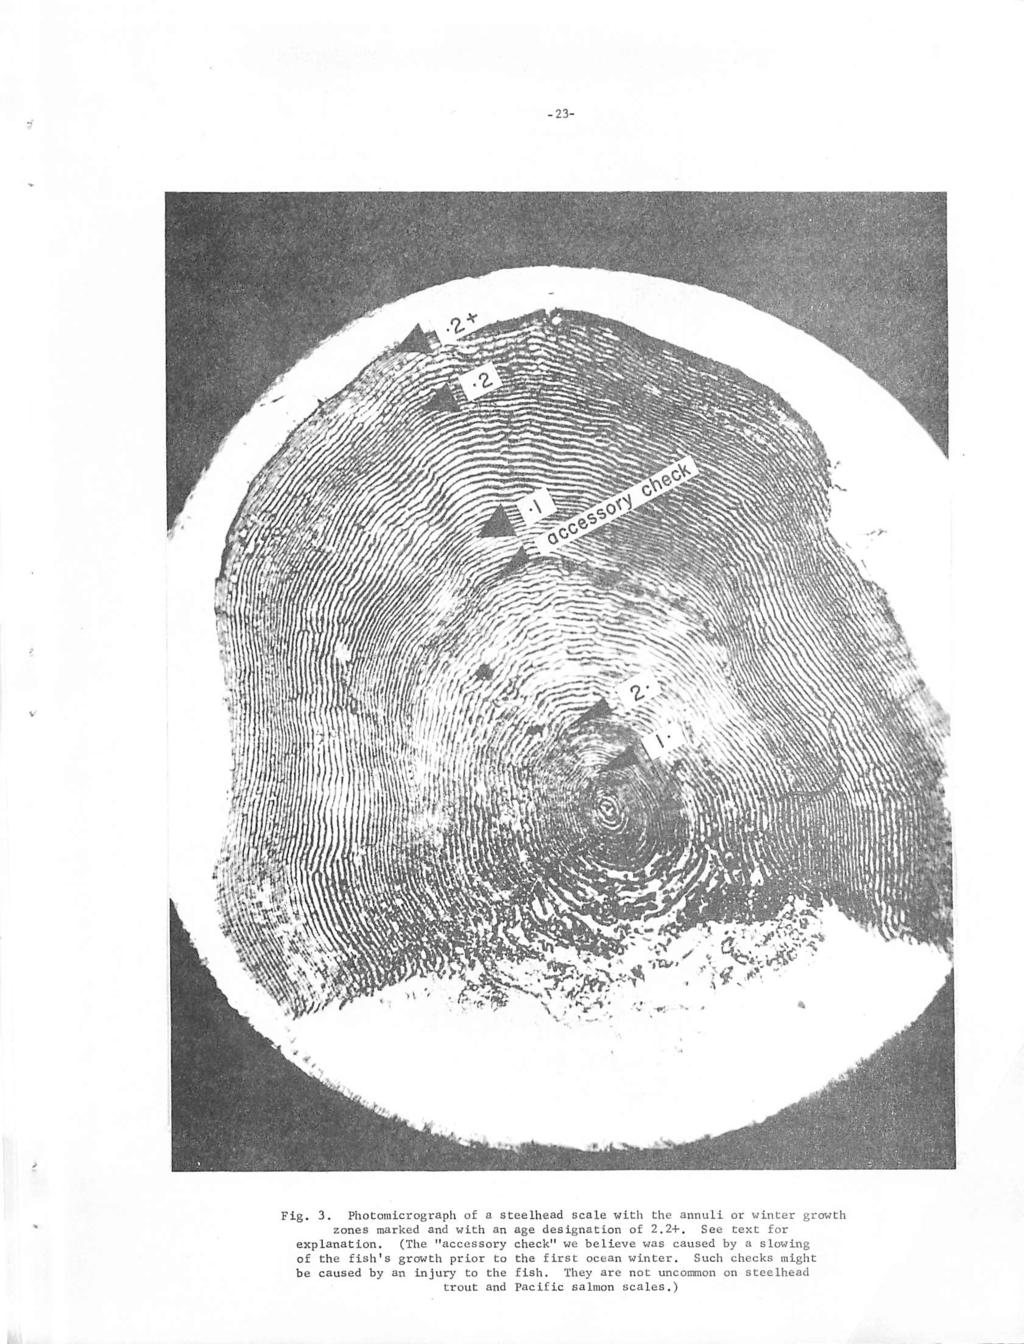 -23- Fig. 3. Photomicrograph of a steelhead scale with the annuli or winter growth zones marked and with an age designation of 2.2+. See text for explanation.